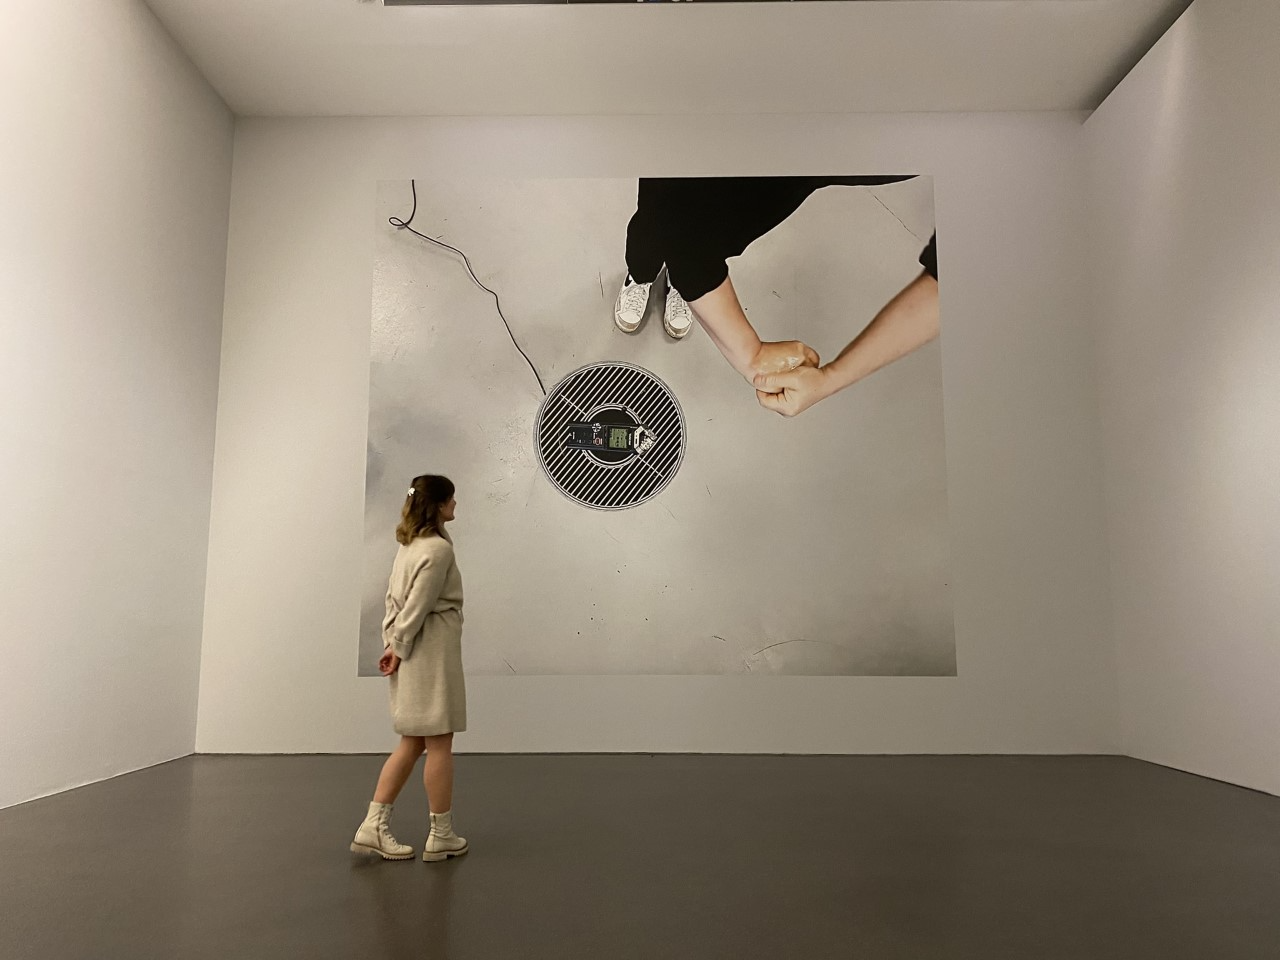 The artwork - a large photograph of Salomé's hands using Nivea cream over a zoom recorder on the floor. The artwork is installed as a large photograph filling a gallery wall, a person stands infront